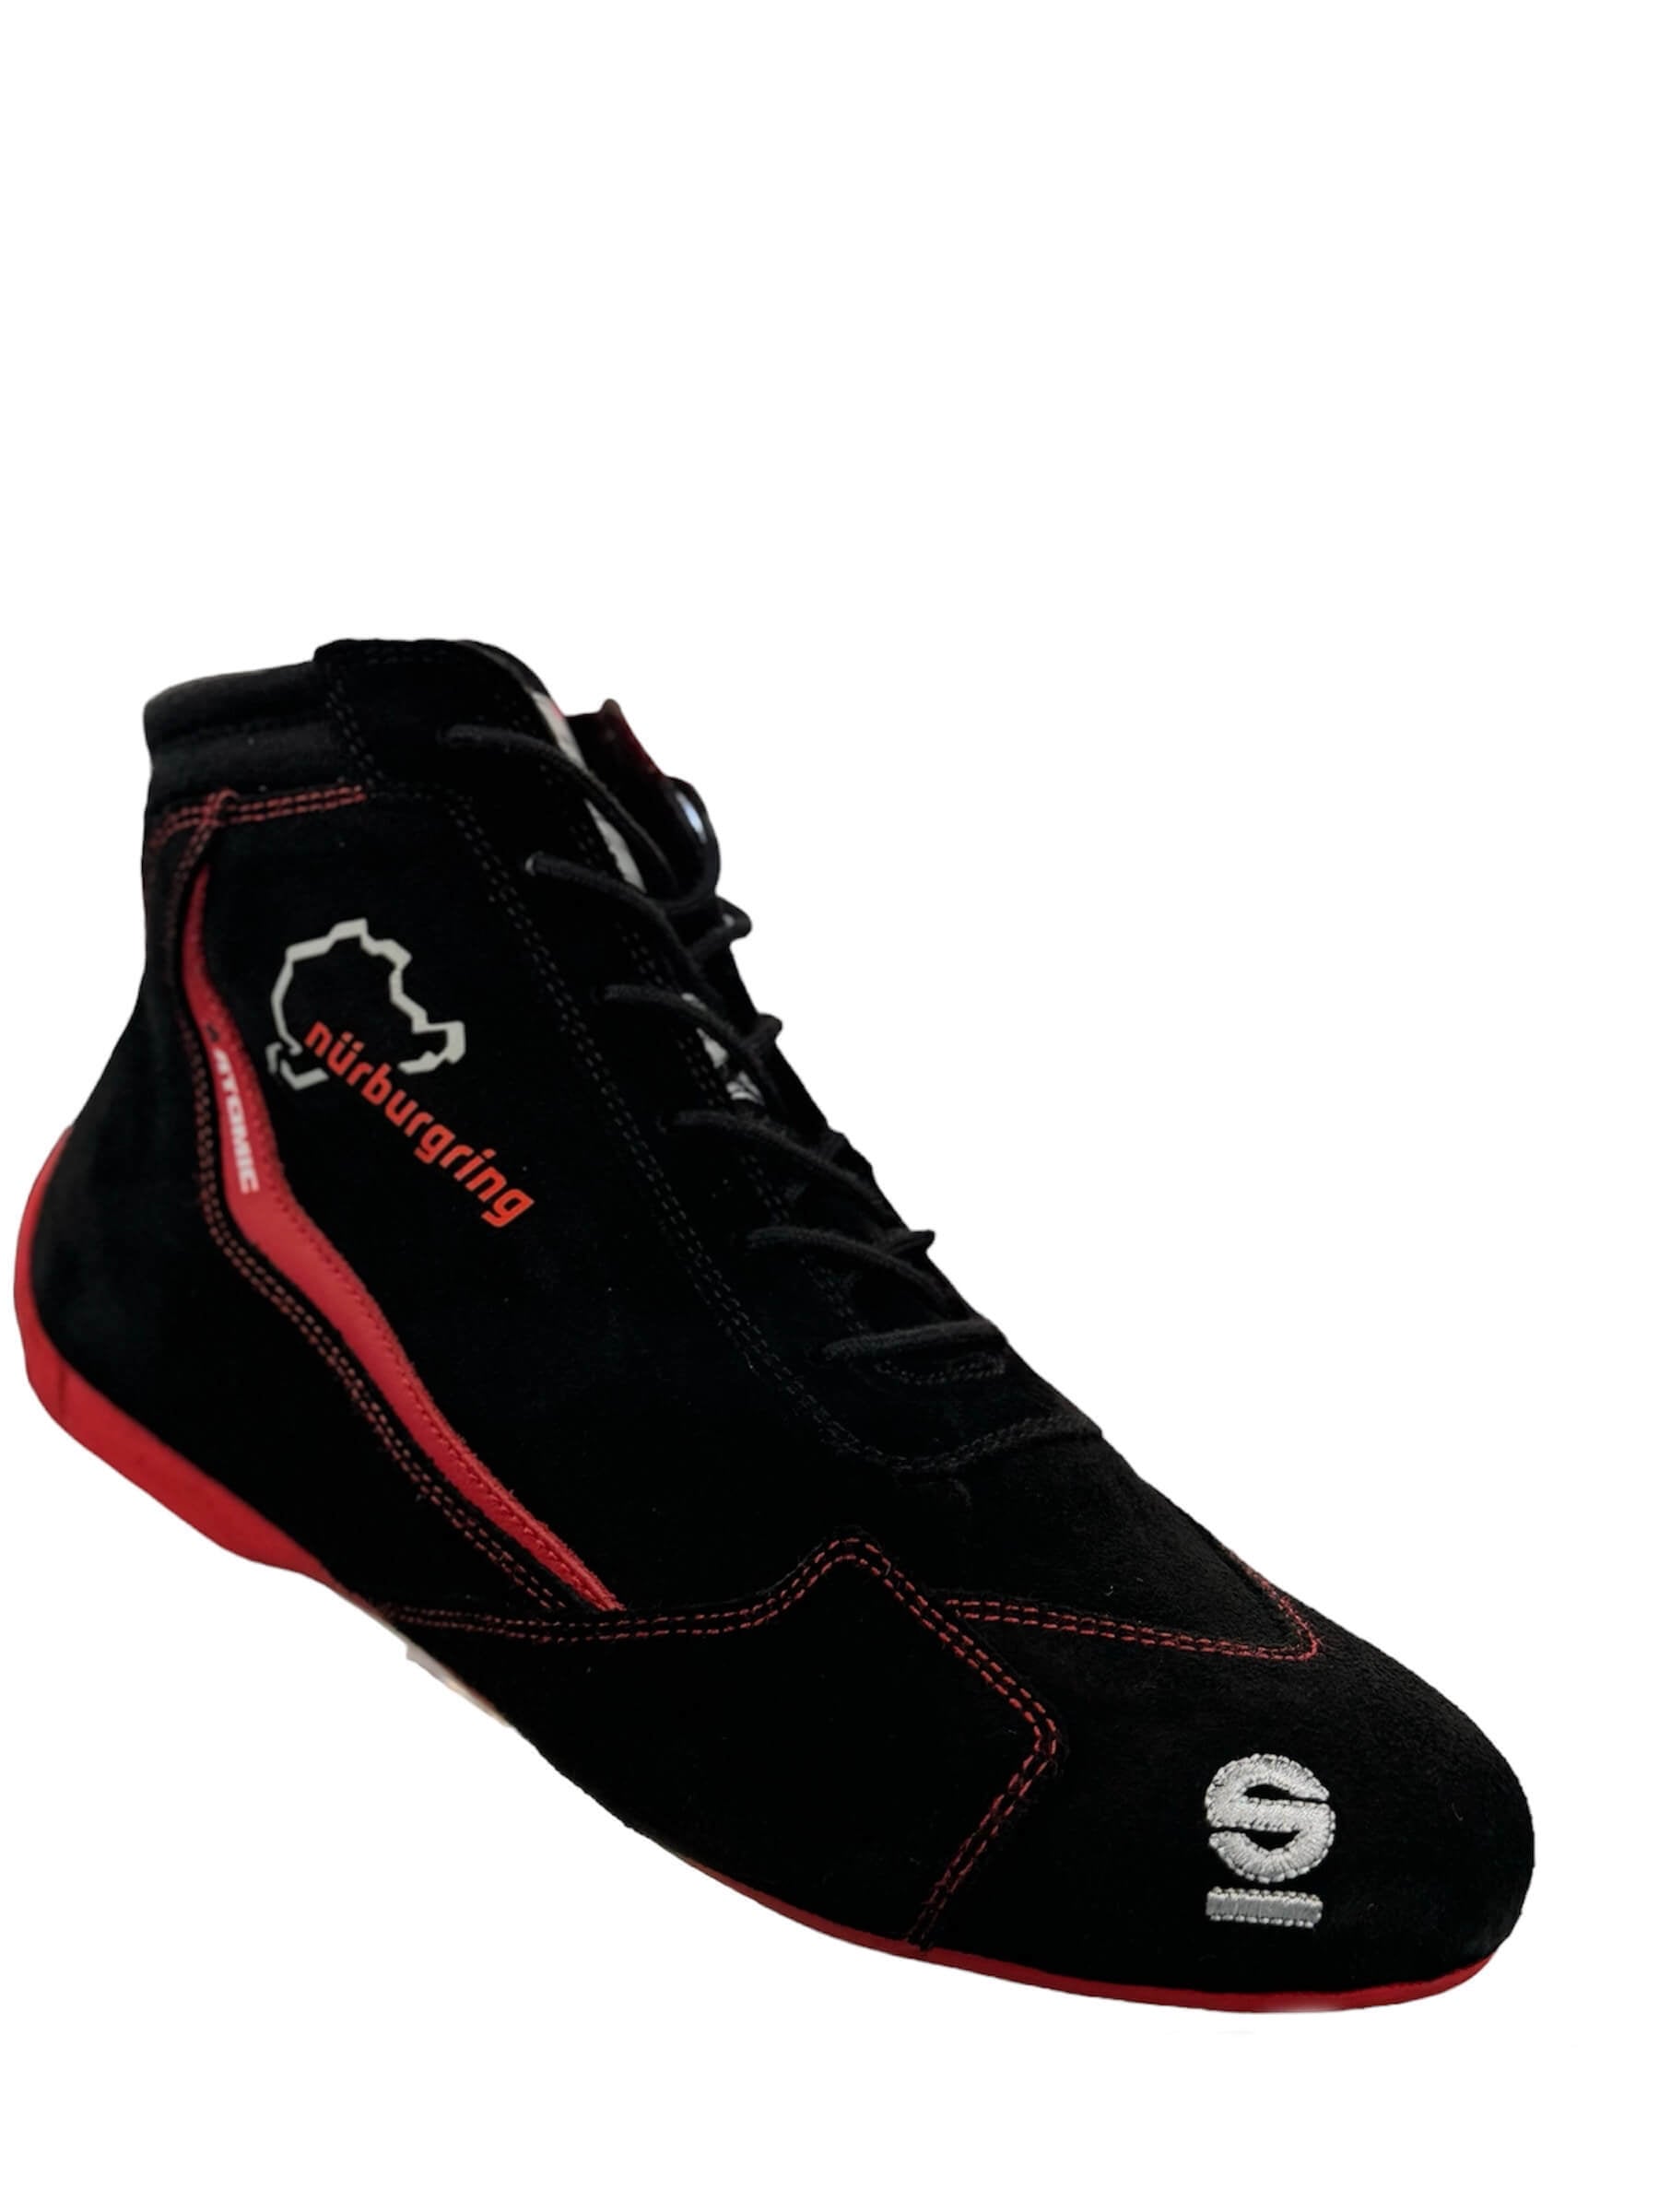 SPARCO 001295SP_NBR39 Shoes Slalom Nurburgring Edition black/red Size 39 Photo-0 